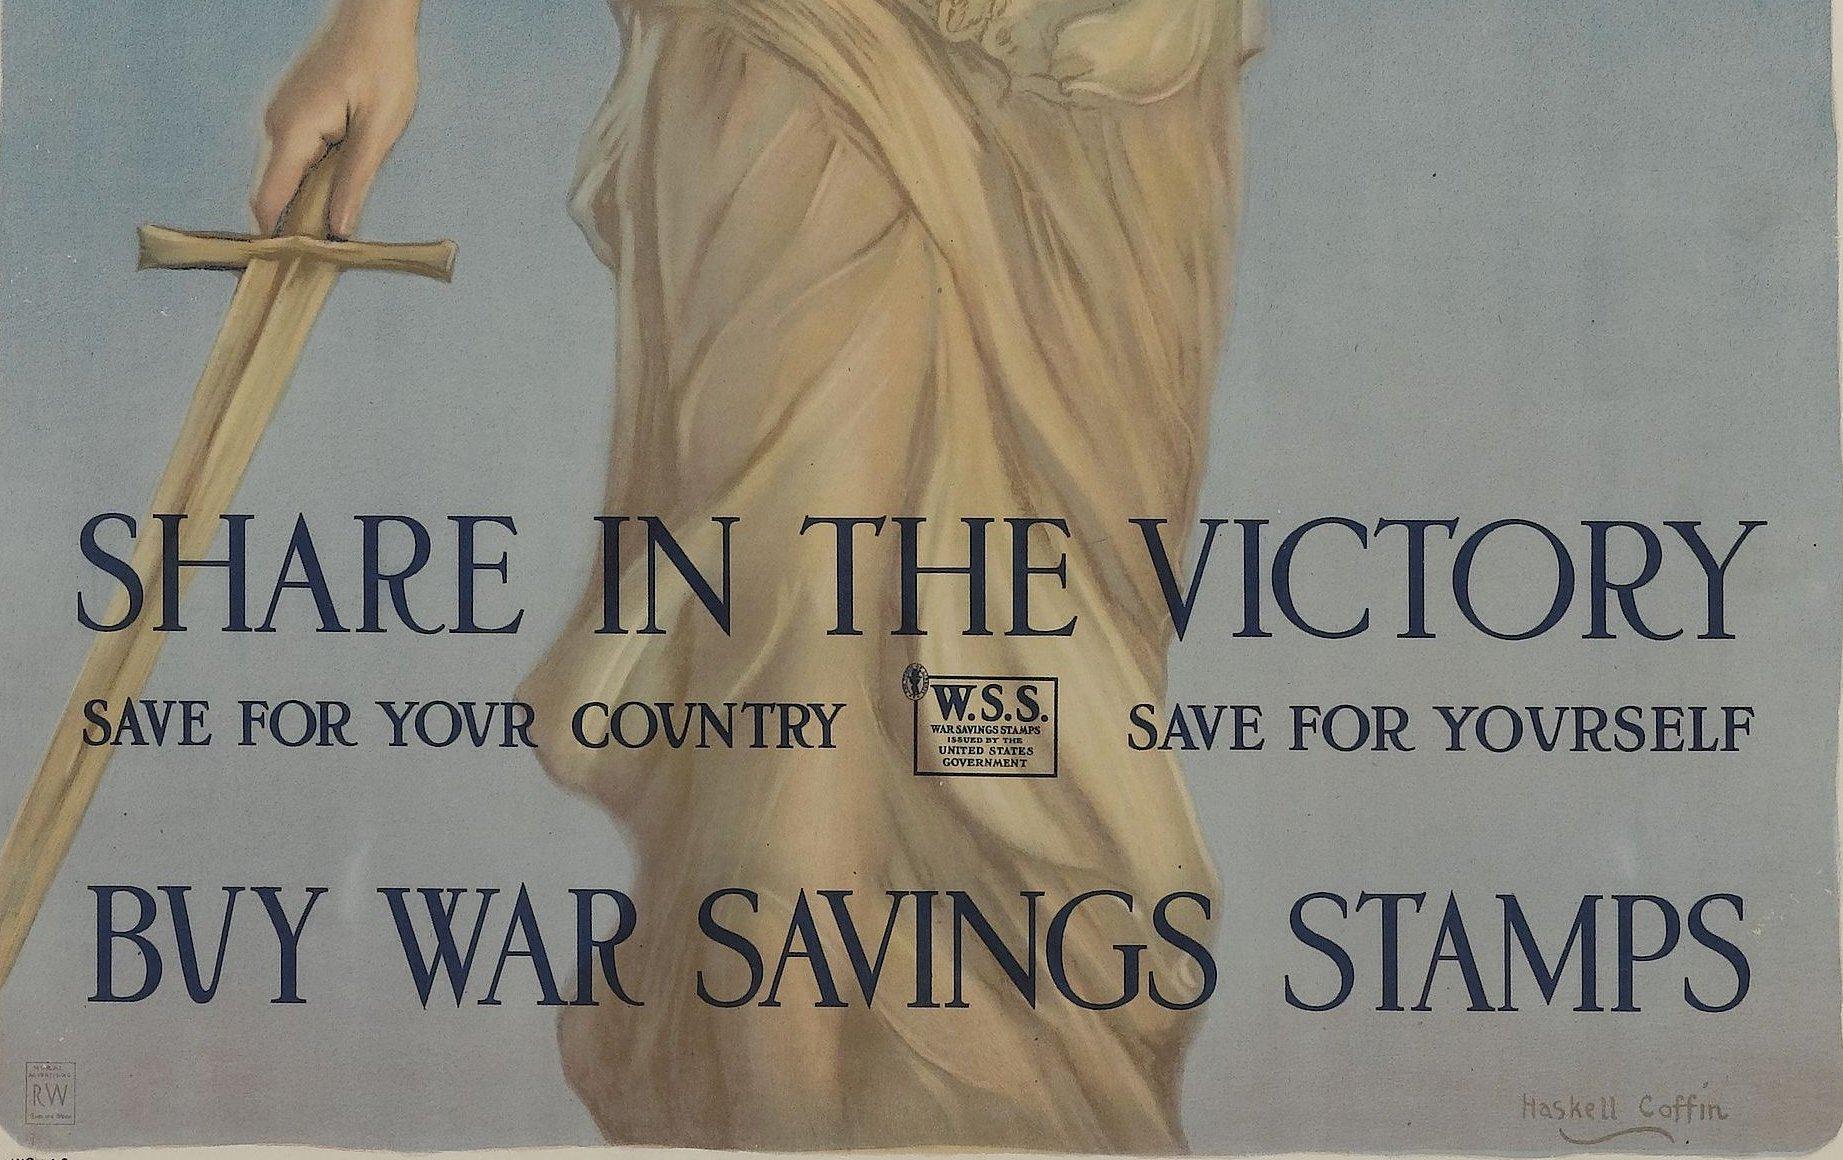 Presented is a stunning WWI War Savings Stamps Poster designed by the famous Haskell Coffin. This poster was published in 1918 by the U.S. Treasury to promote the Victory Liberty Bonds. It features winged Nike, the Greek goddess of victory, holding